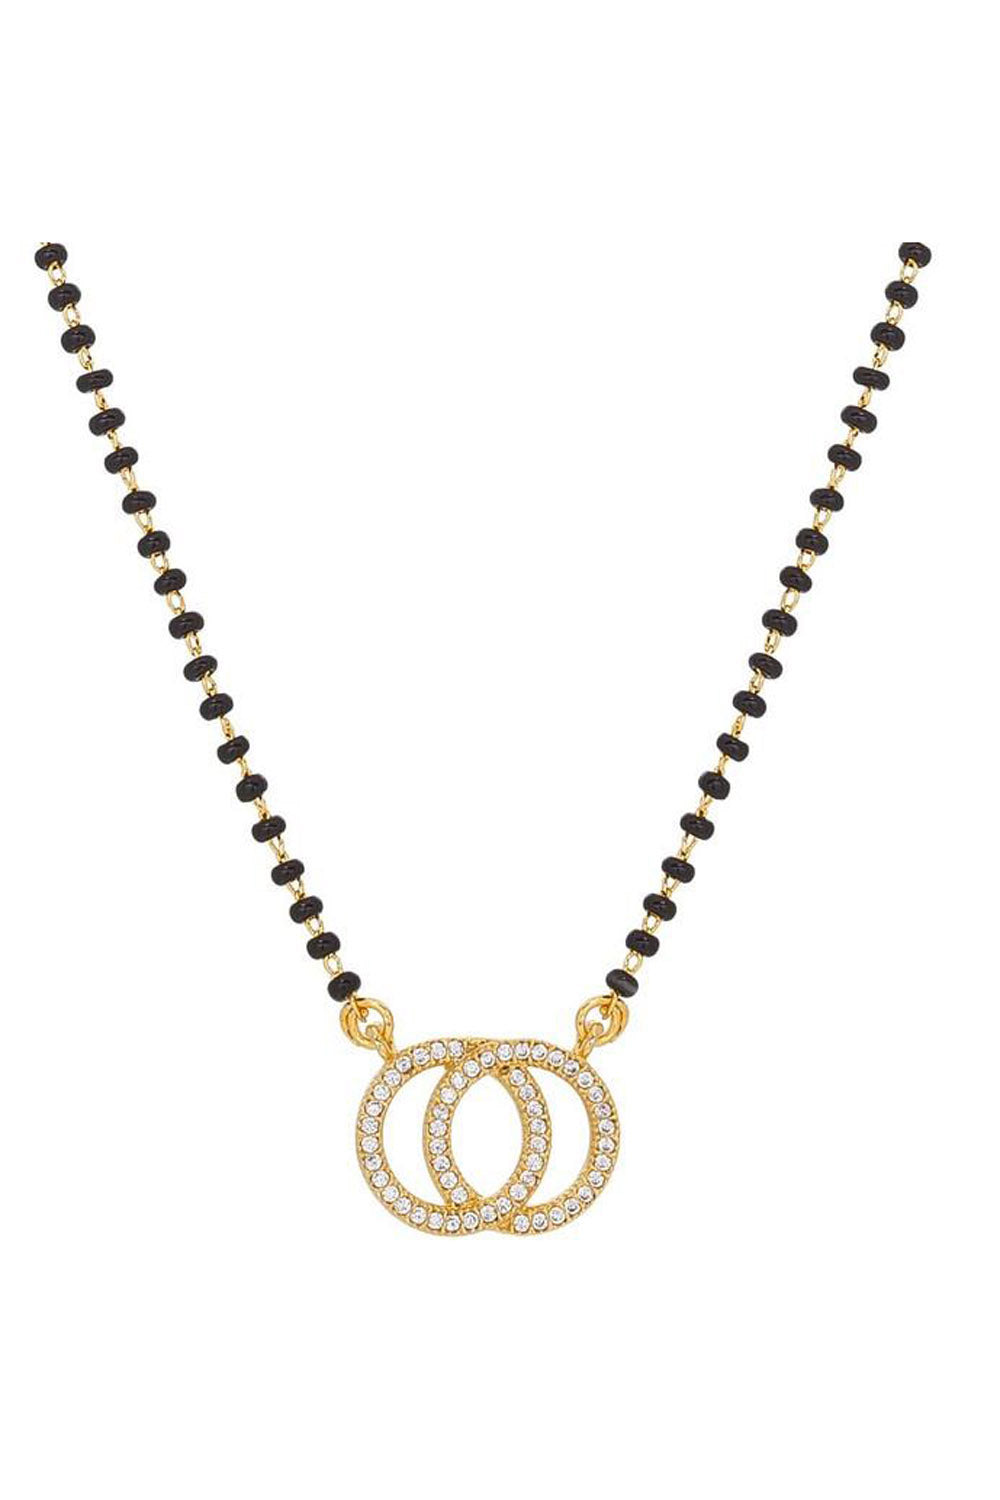 Women's Alloy Mangalsutra in White, Gold and Black